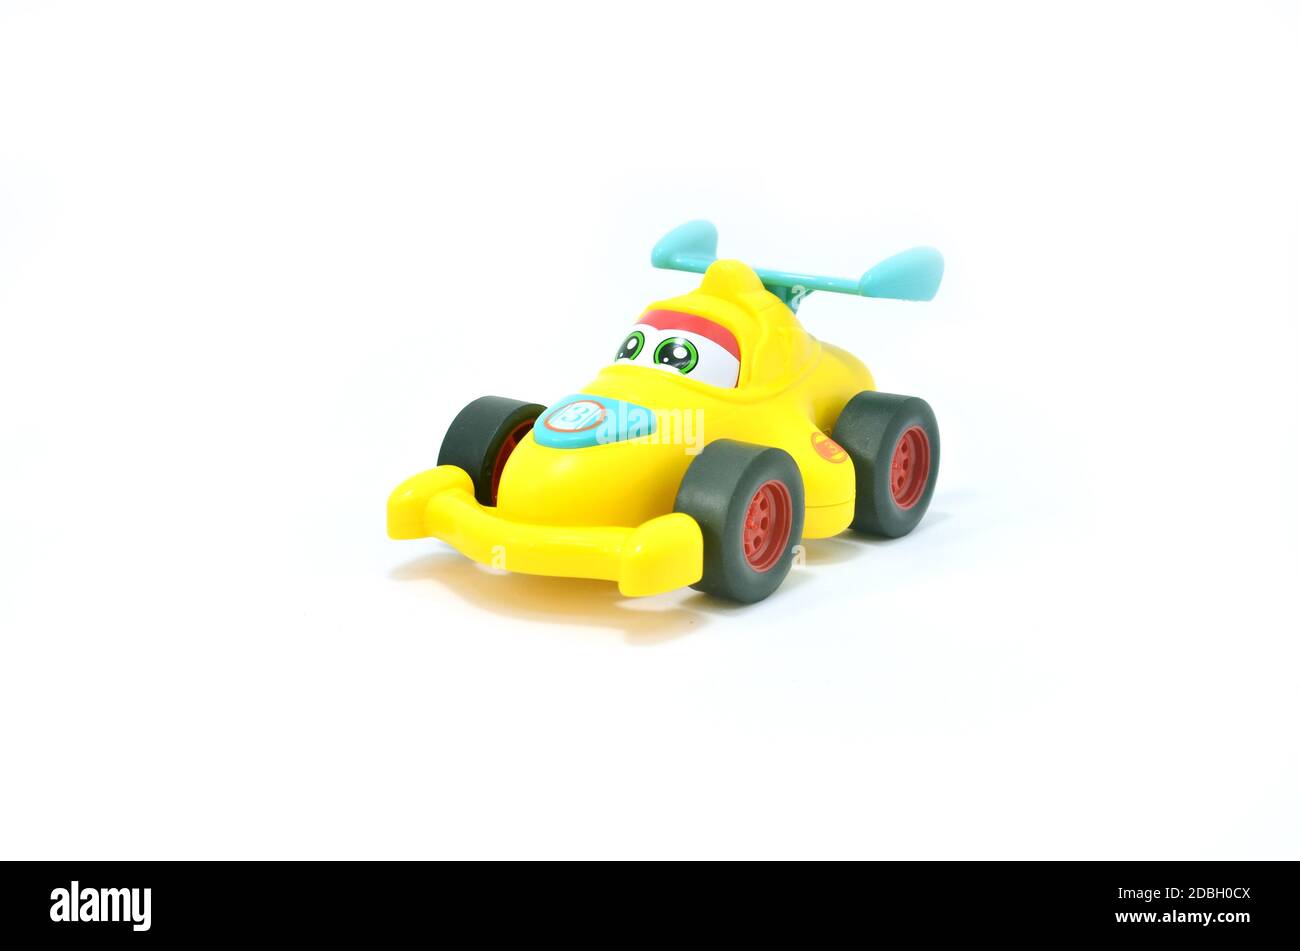 Yellow Toy Race Car Isolated on White Background Stock Photo